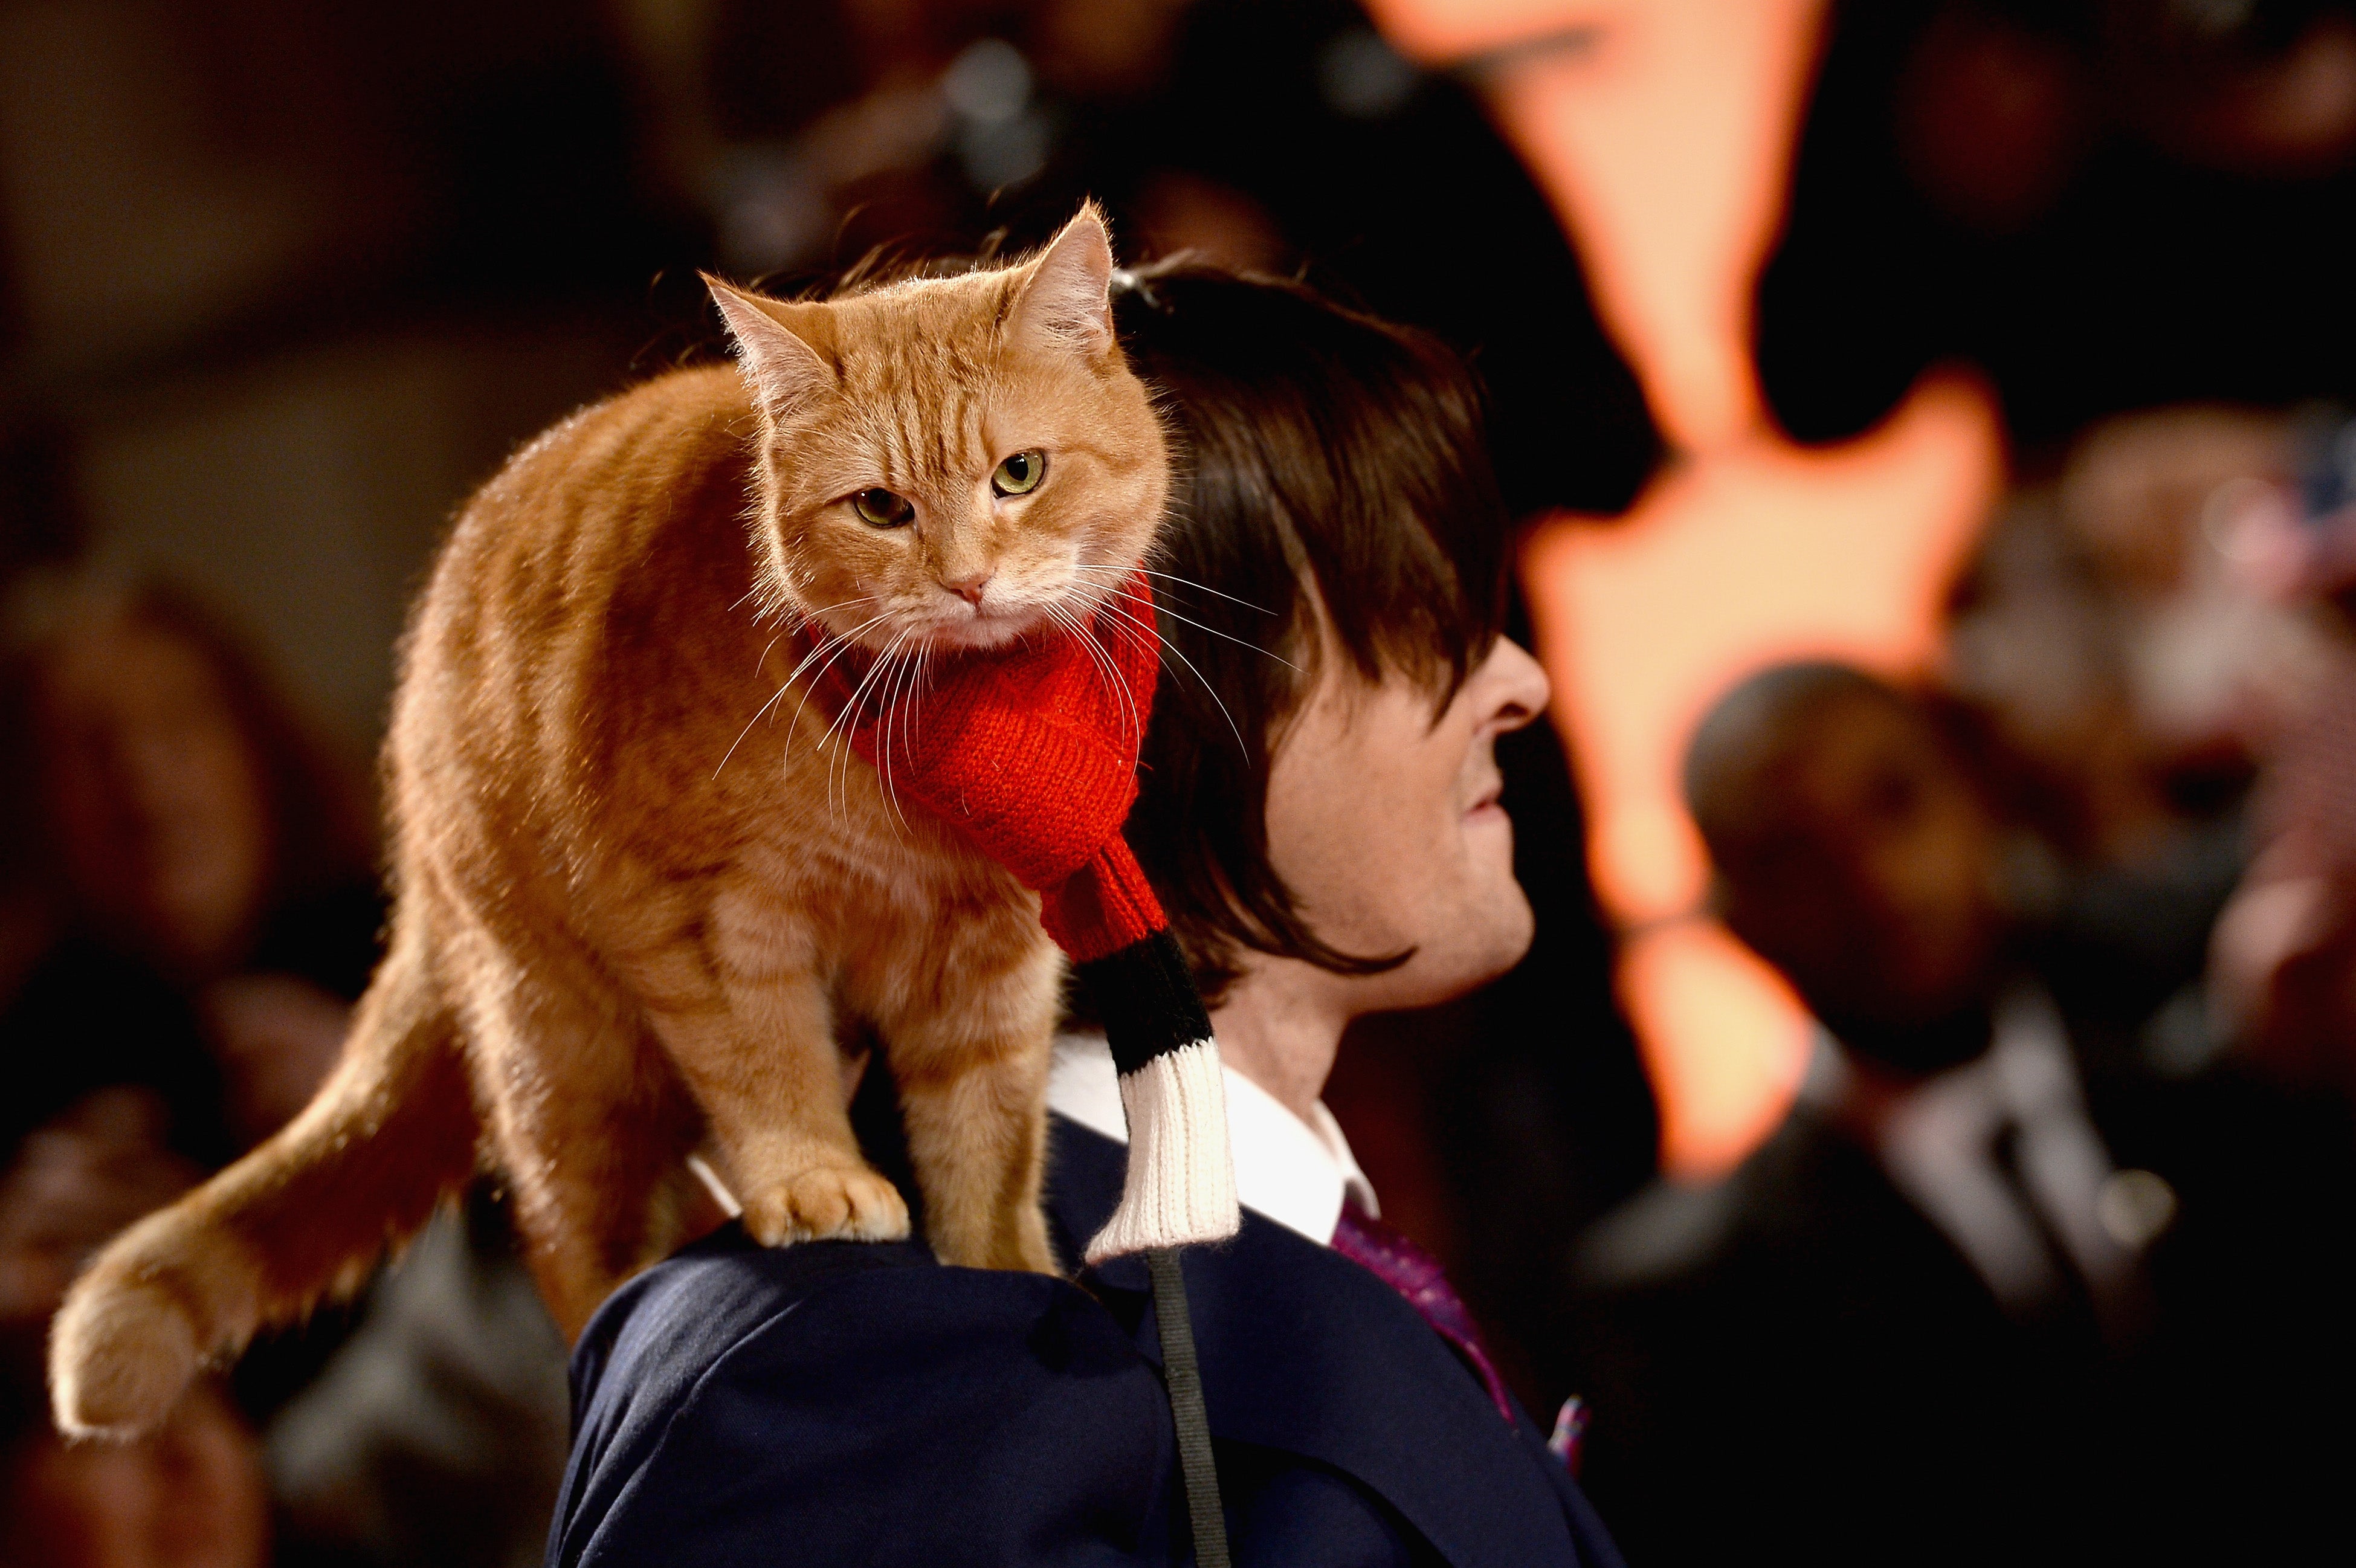 James Bowen and Bob the cat attend the UK Premiere of "A Street Cat Named Bob" in aid of Action On Addiction on November 3, 2016